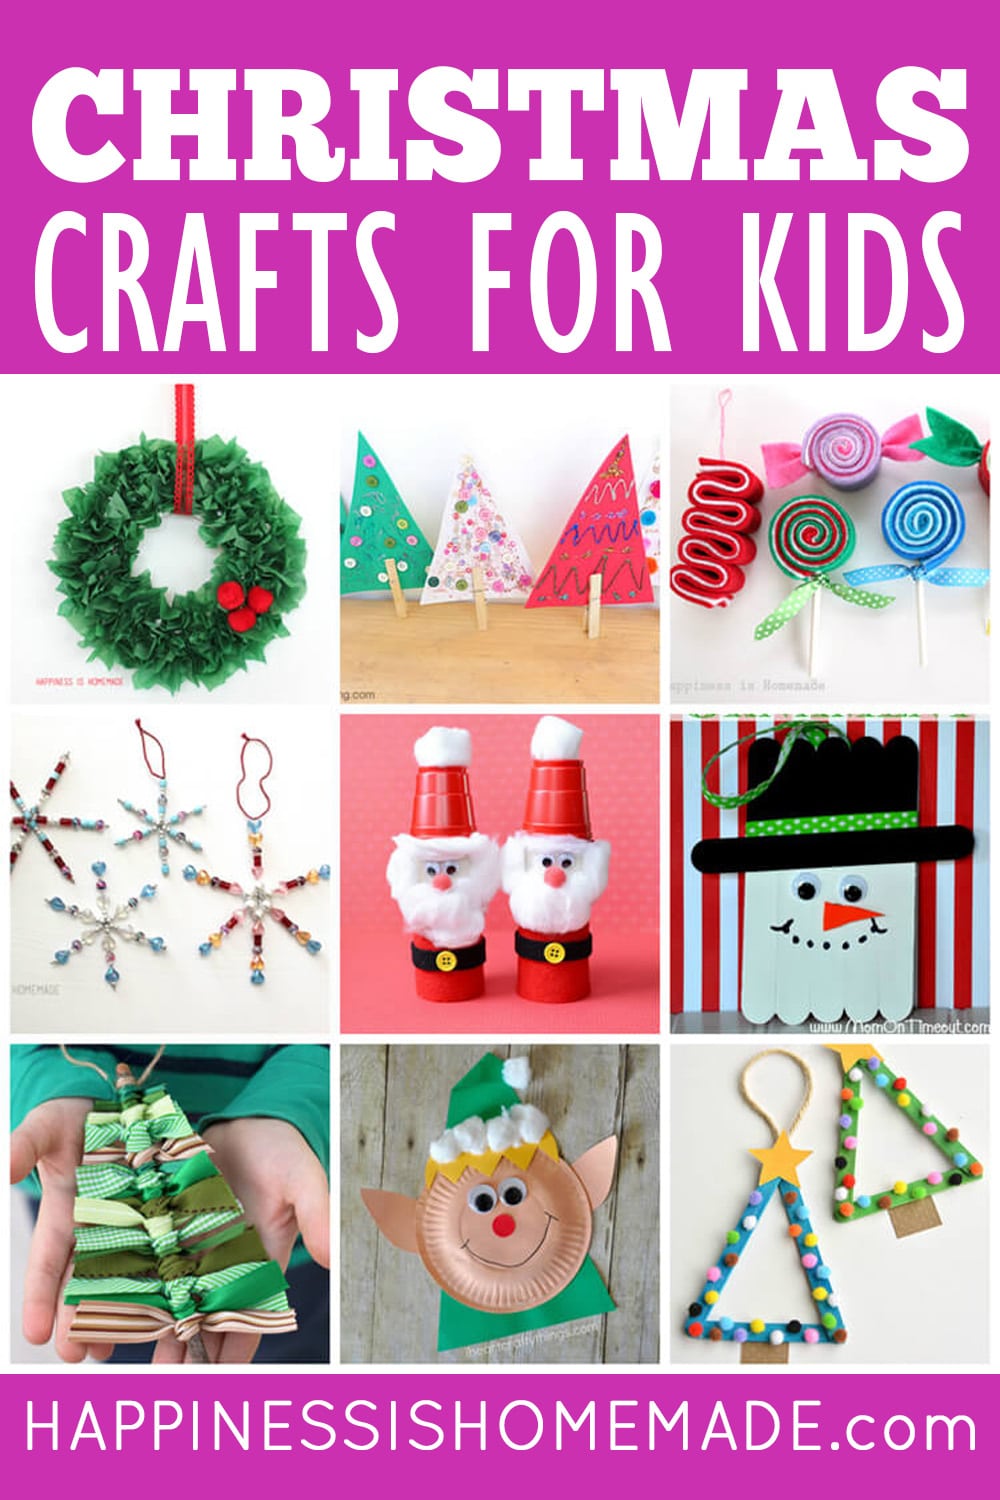 20 Best Craft Kits for Kids in 2022 - Fun Art Kits for All Ages